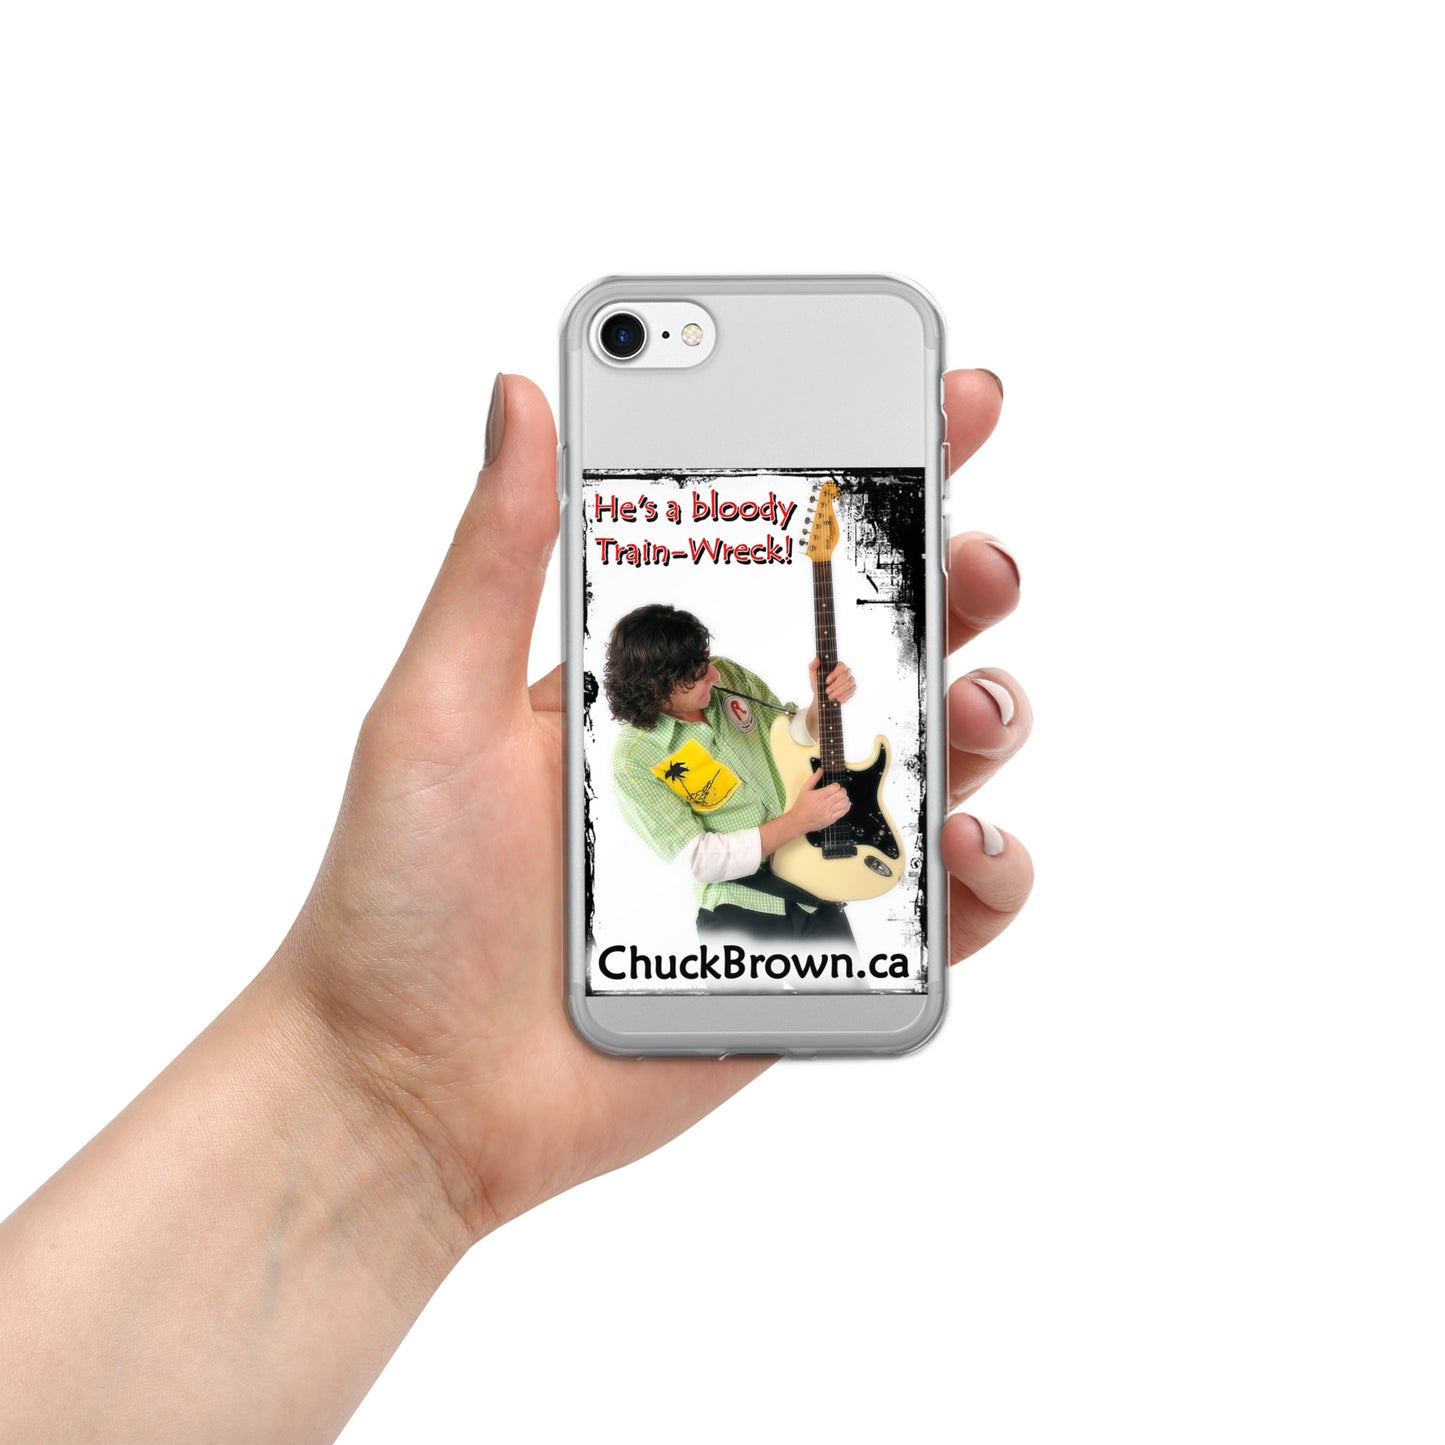 CB phone case for APPLE iPhone®: "...Train Wreck"